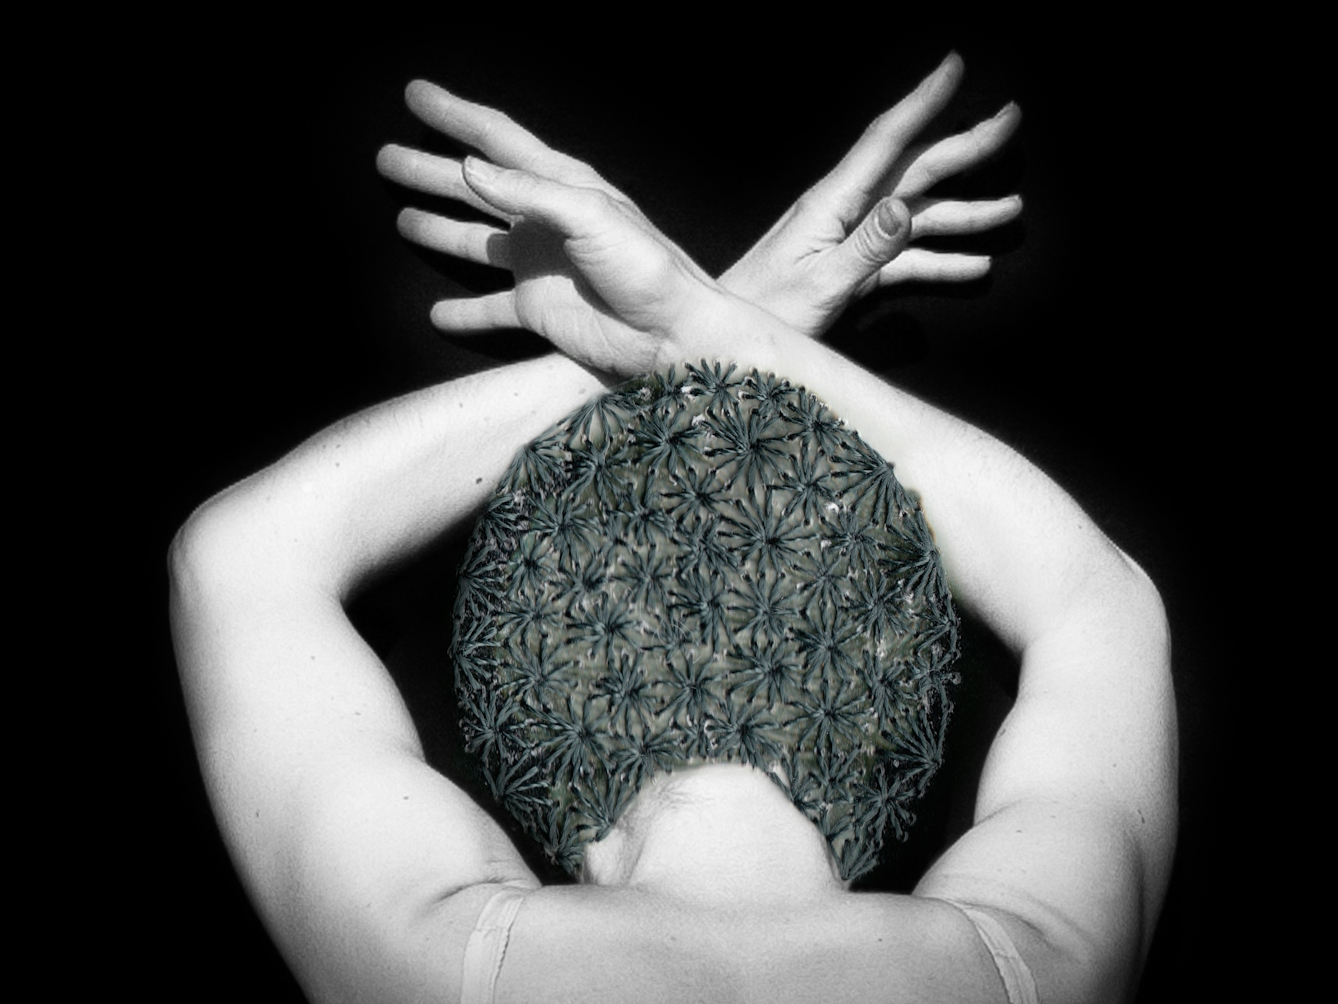 Artwork made up of a black and white photograph of a female figure from behind, against a black background. Her arms are held above her head and her wrists cross, fingers extended. Embroidered into the photographic print with grey thread is a crisscross floral pattern which exactly covers her head and hair. 